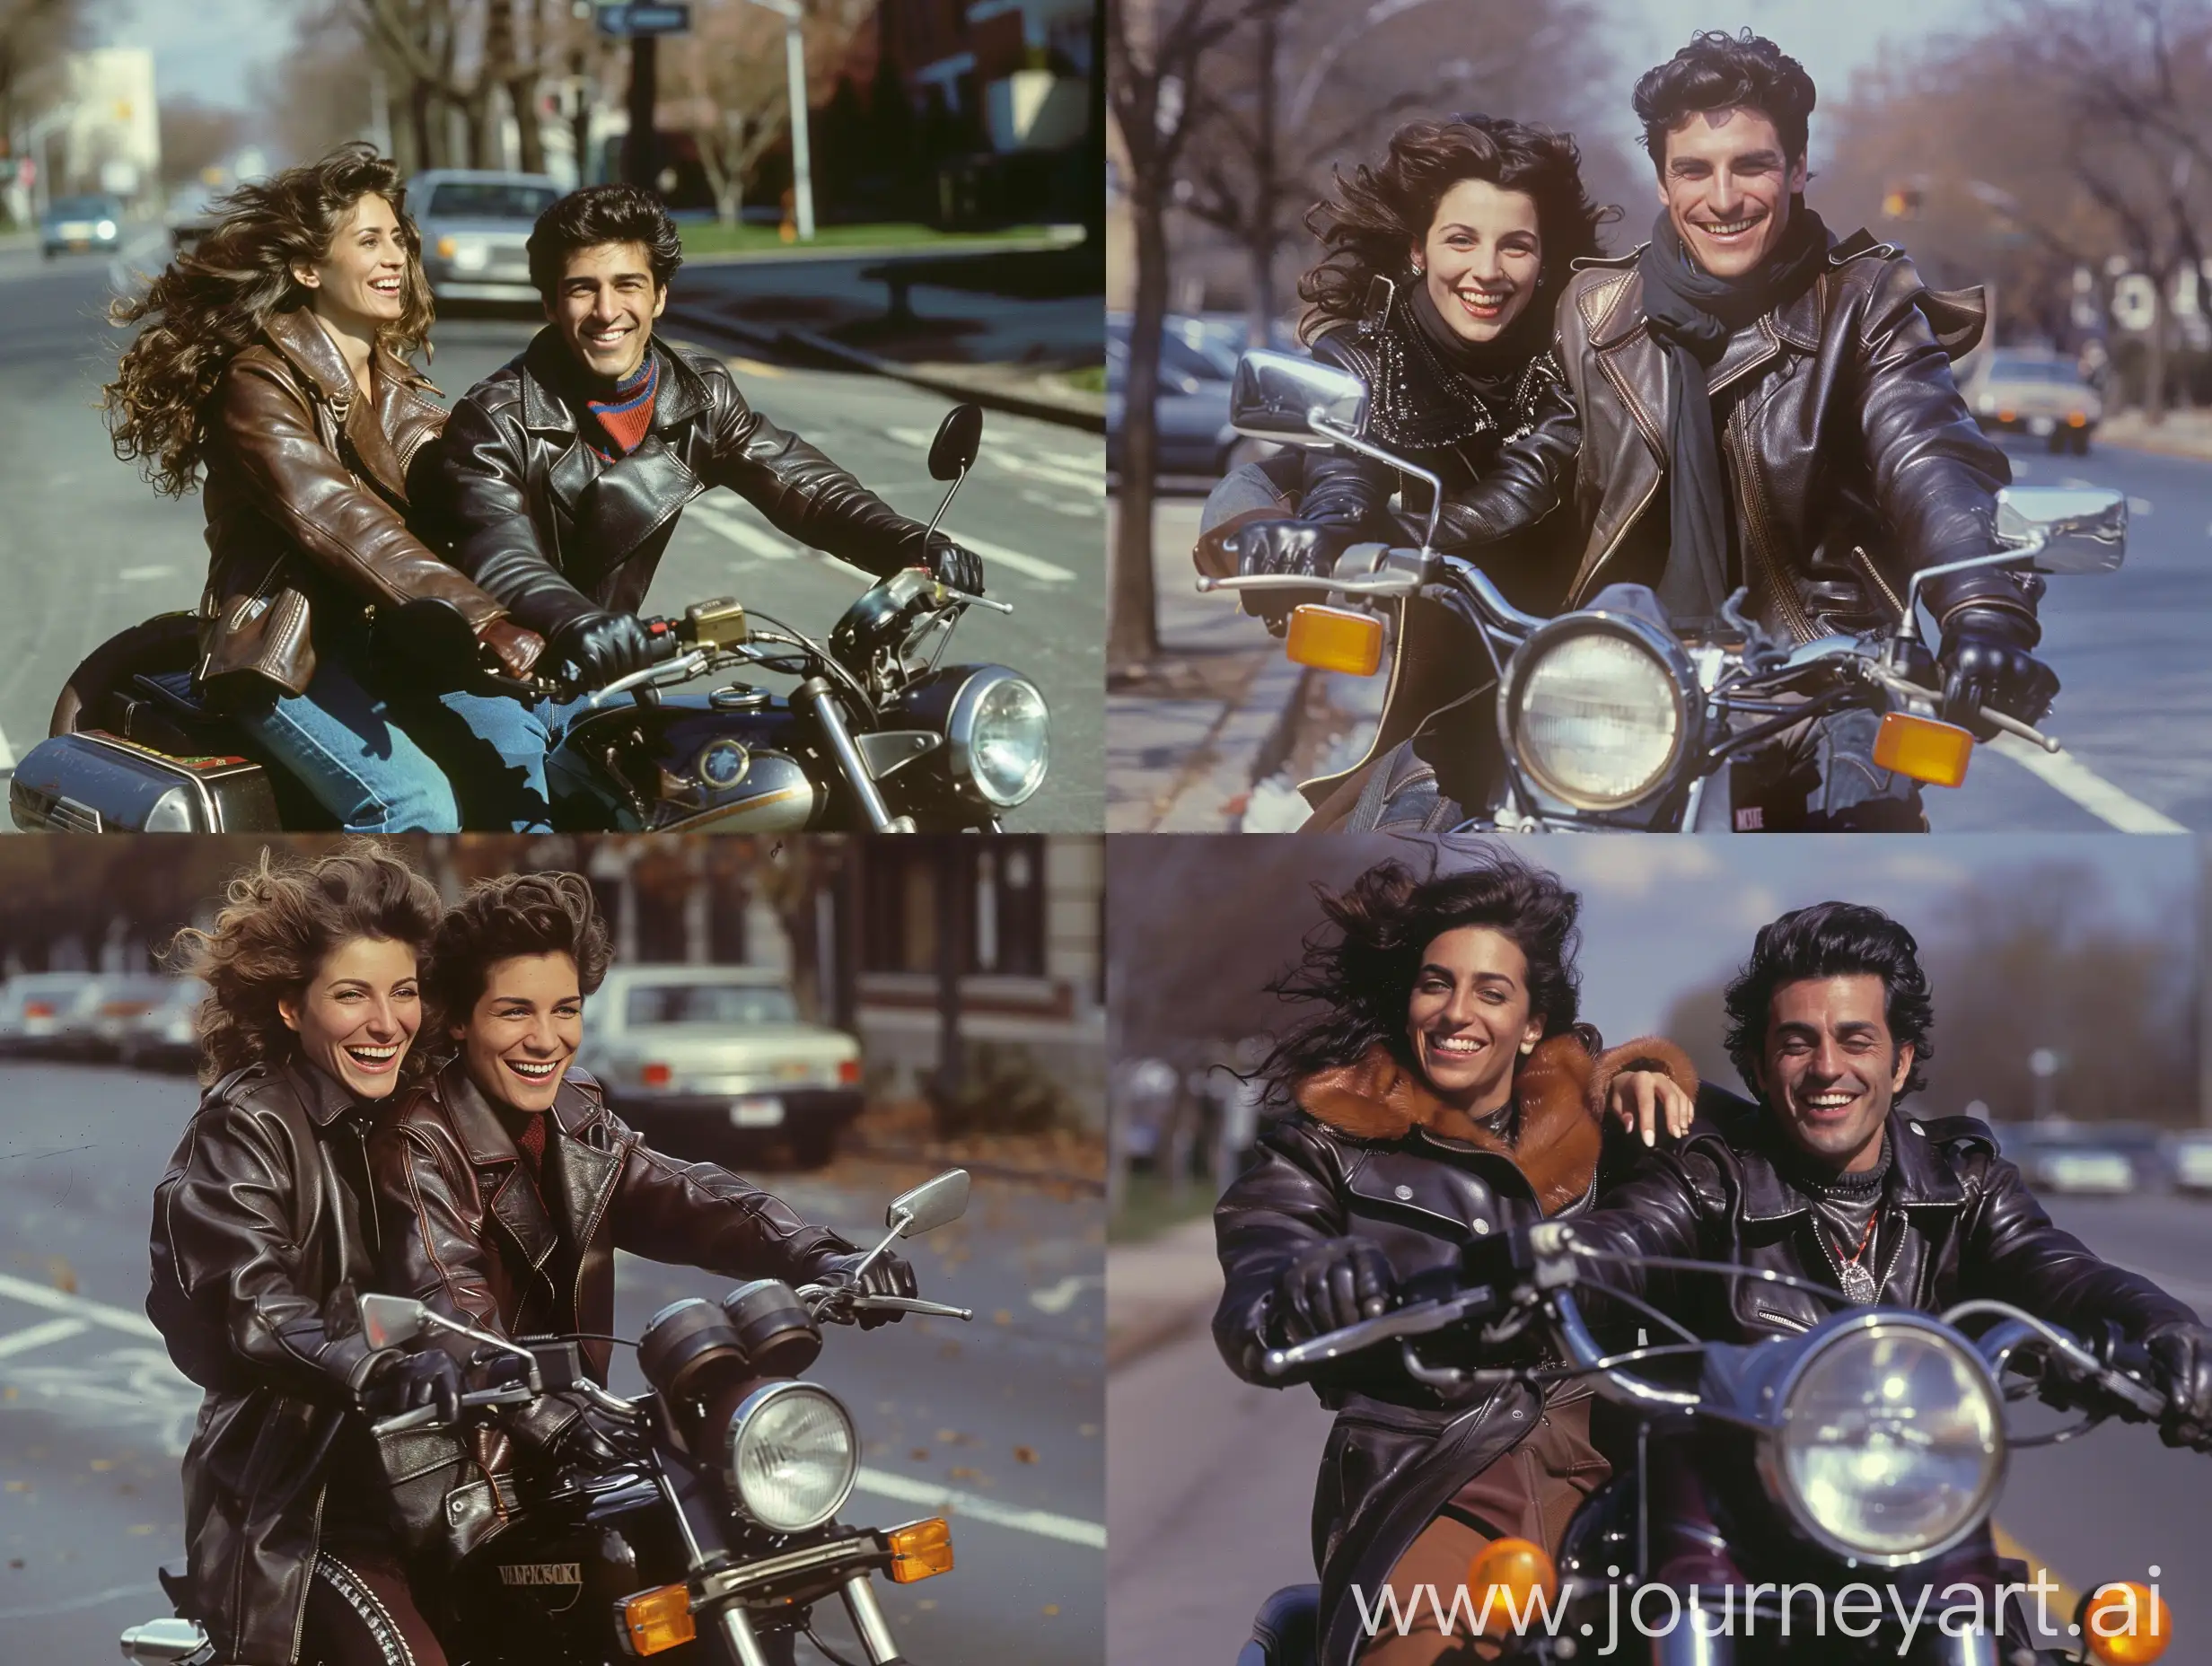 1980s-Chic-Italian-Couple-on-Vintage-Motorcycle-in-New-York-Suburbs